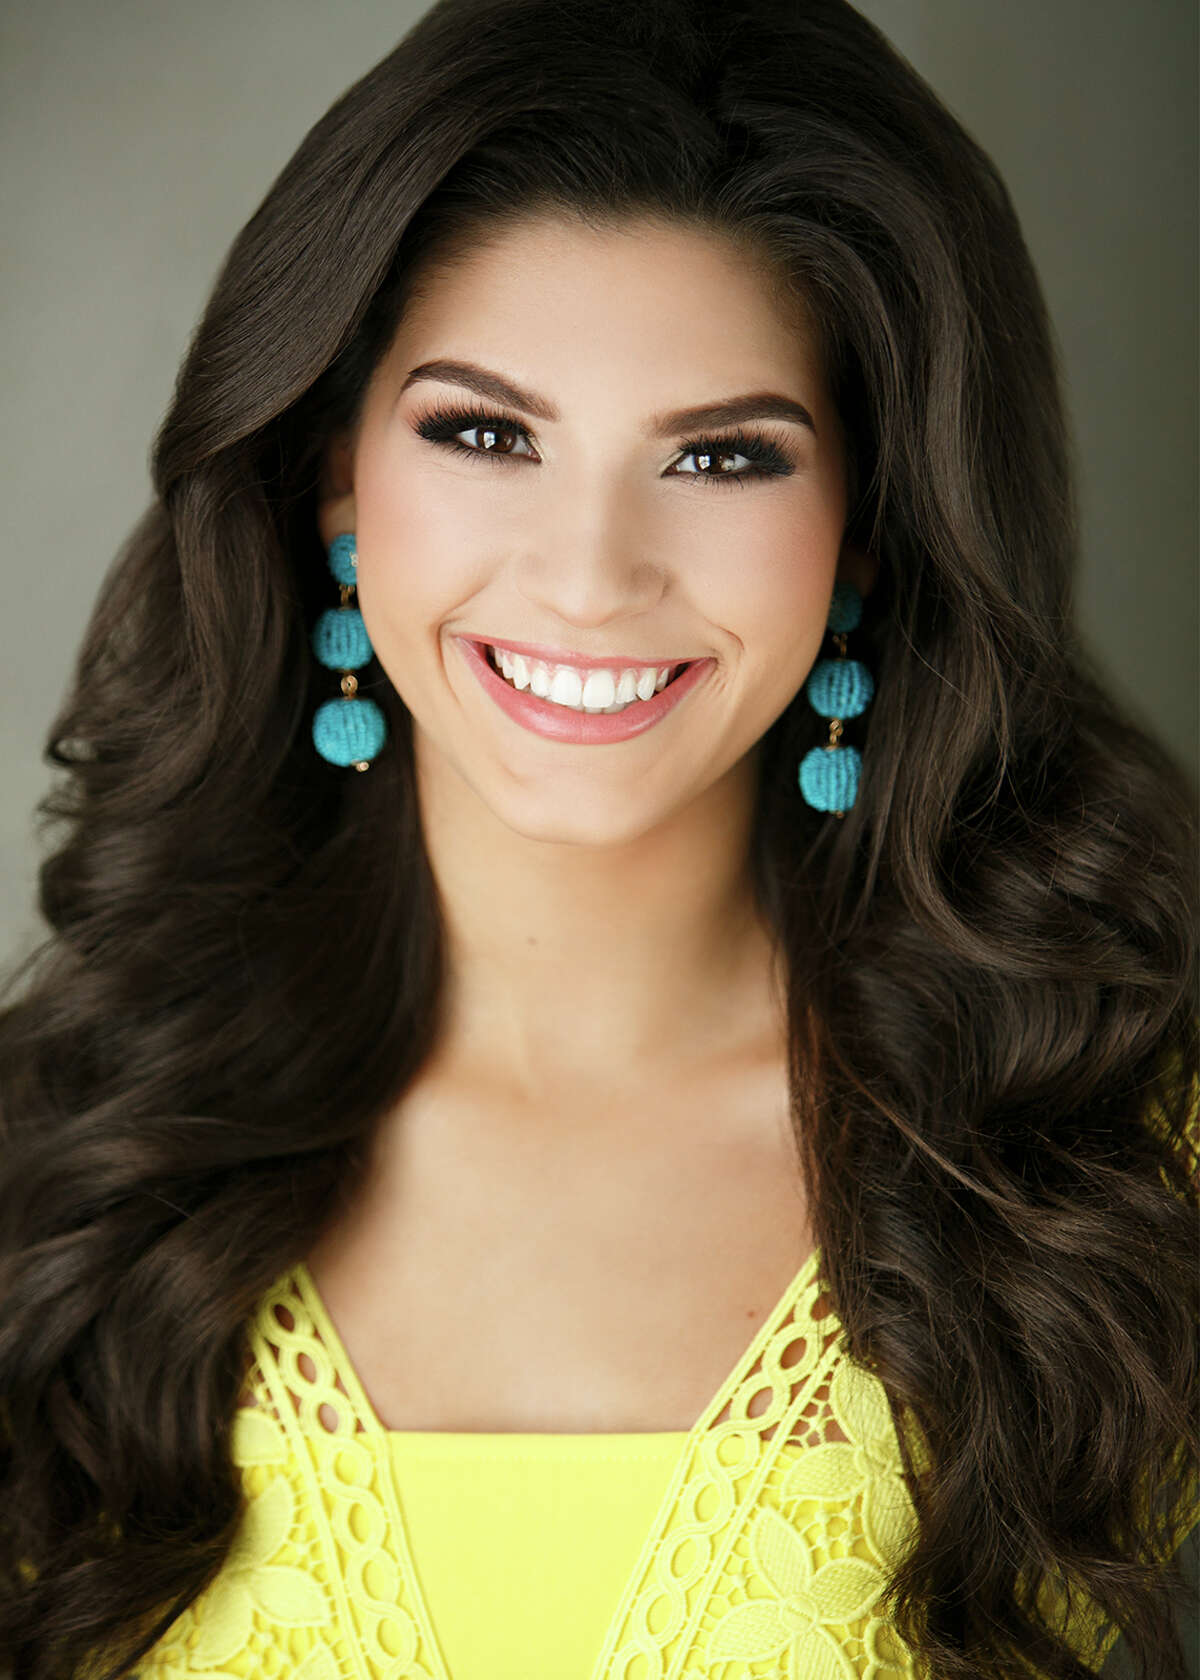 See the winner of the Miss Teen Texas USA pageant